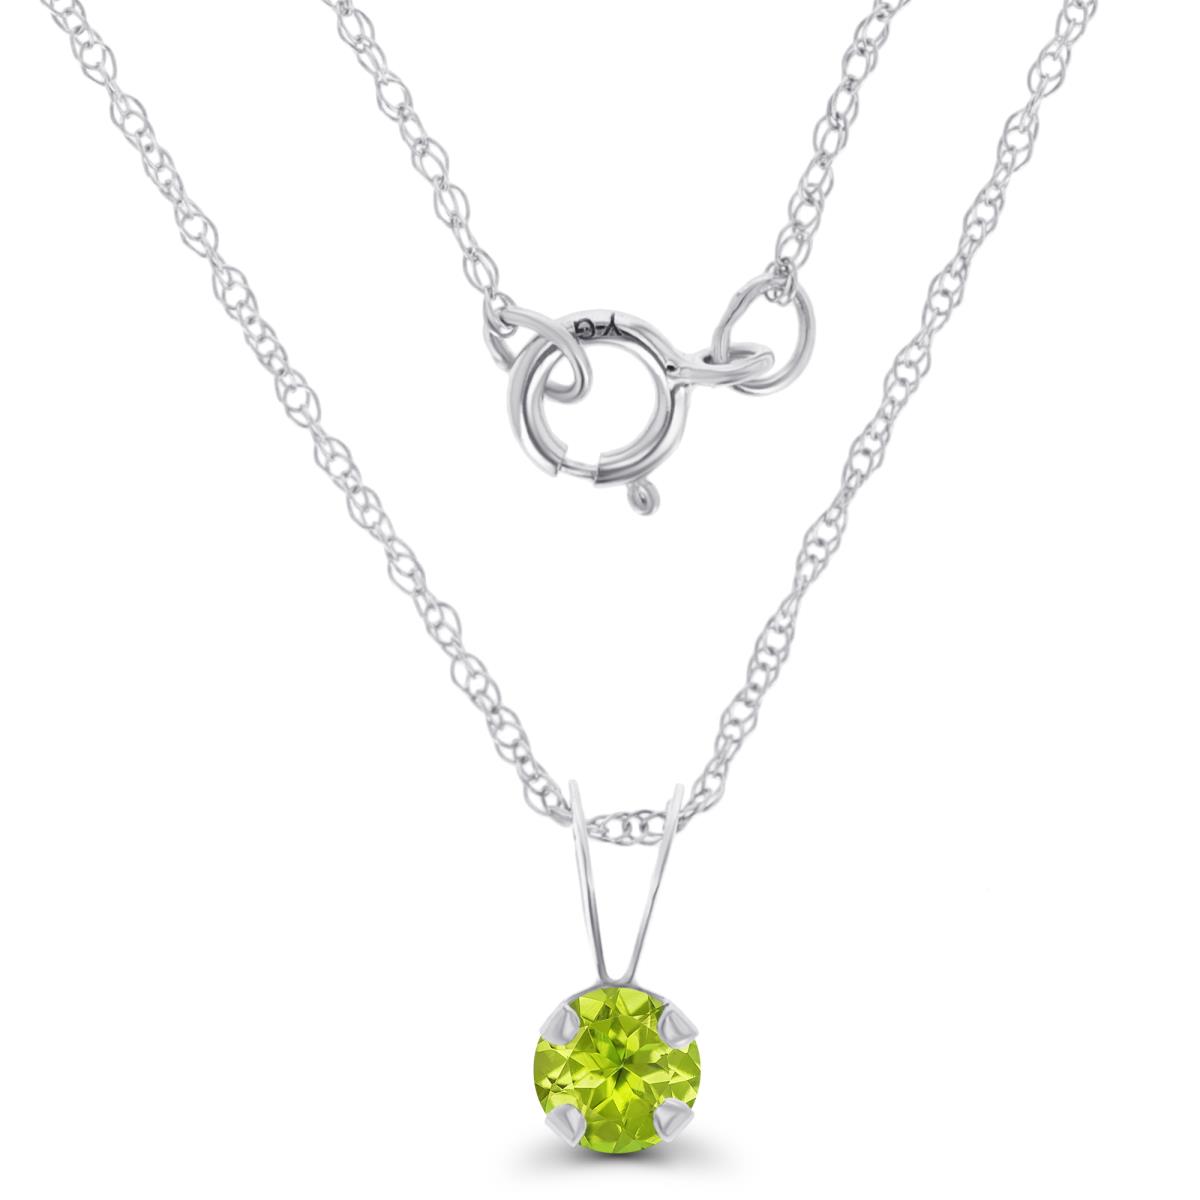 14K White Gold 4mm Round Peridot 18" Rope Chain Necklace